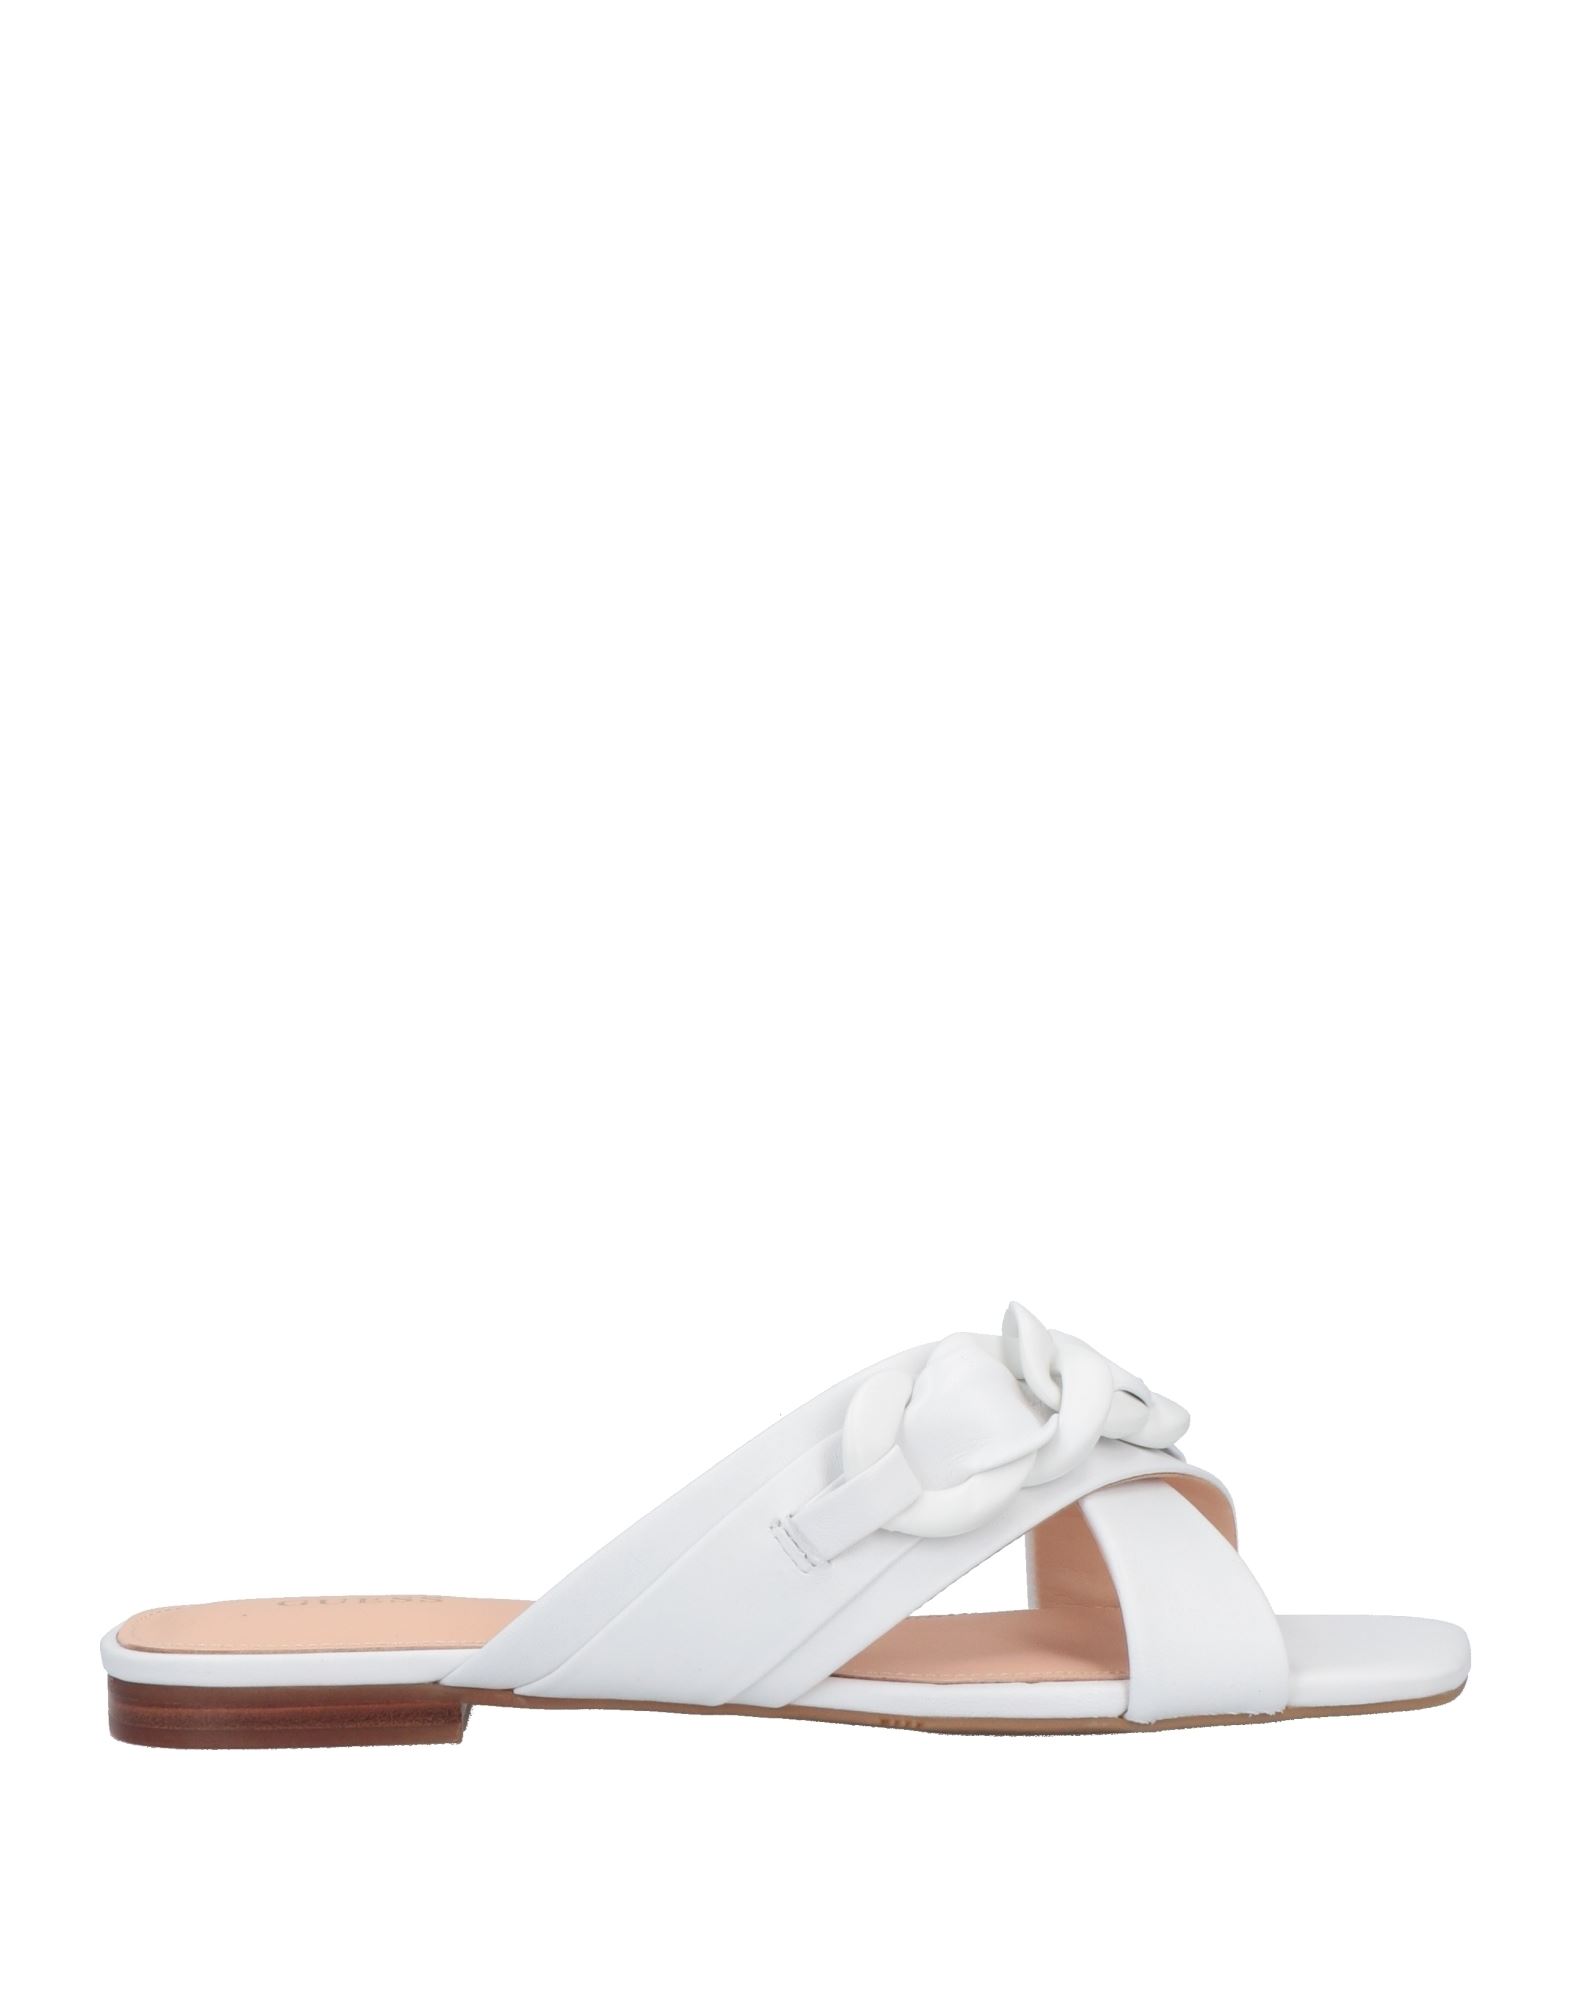 Guess Sandals In White